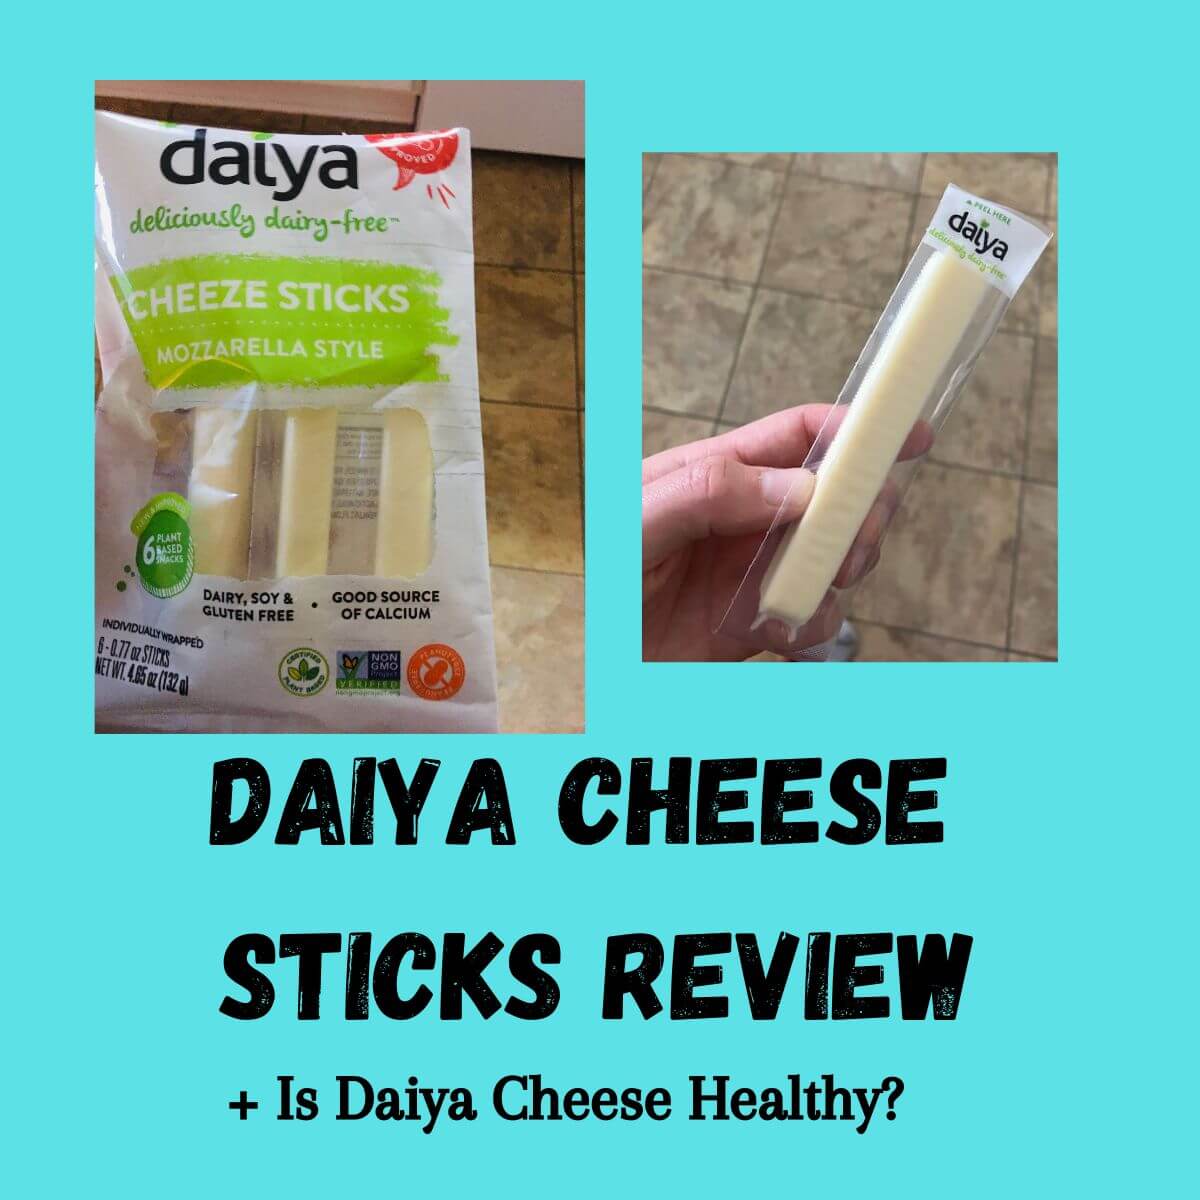 Image of a Daiya cheese stick package and a hand holding a single cheeze stick. Text reads: Daiya Cheese Sticks Review + Is Daiya Cheese Healthy?